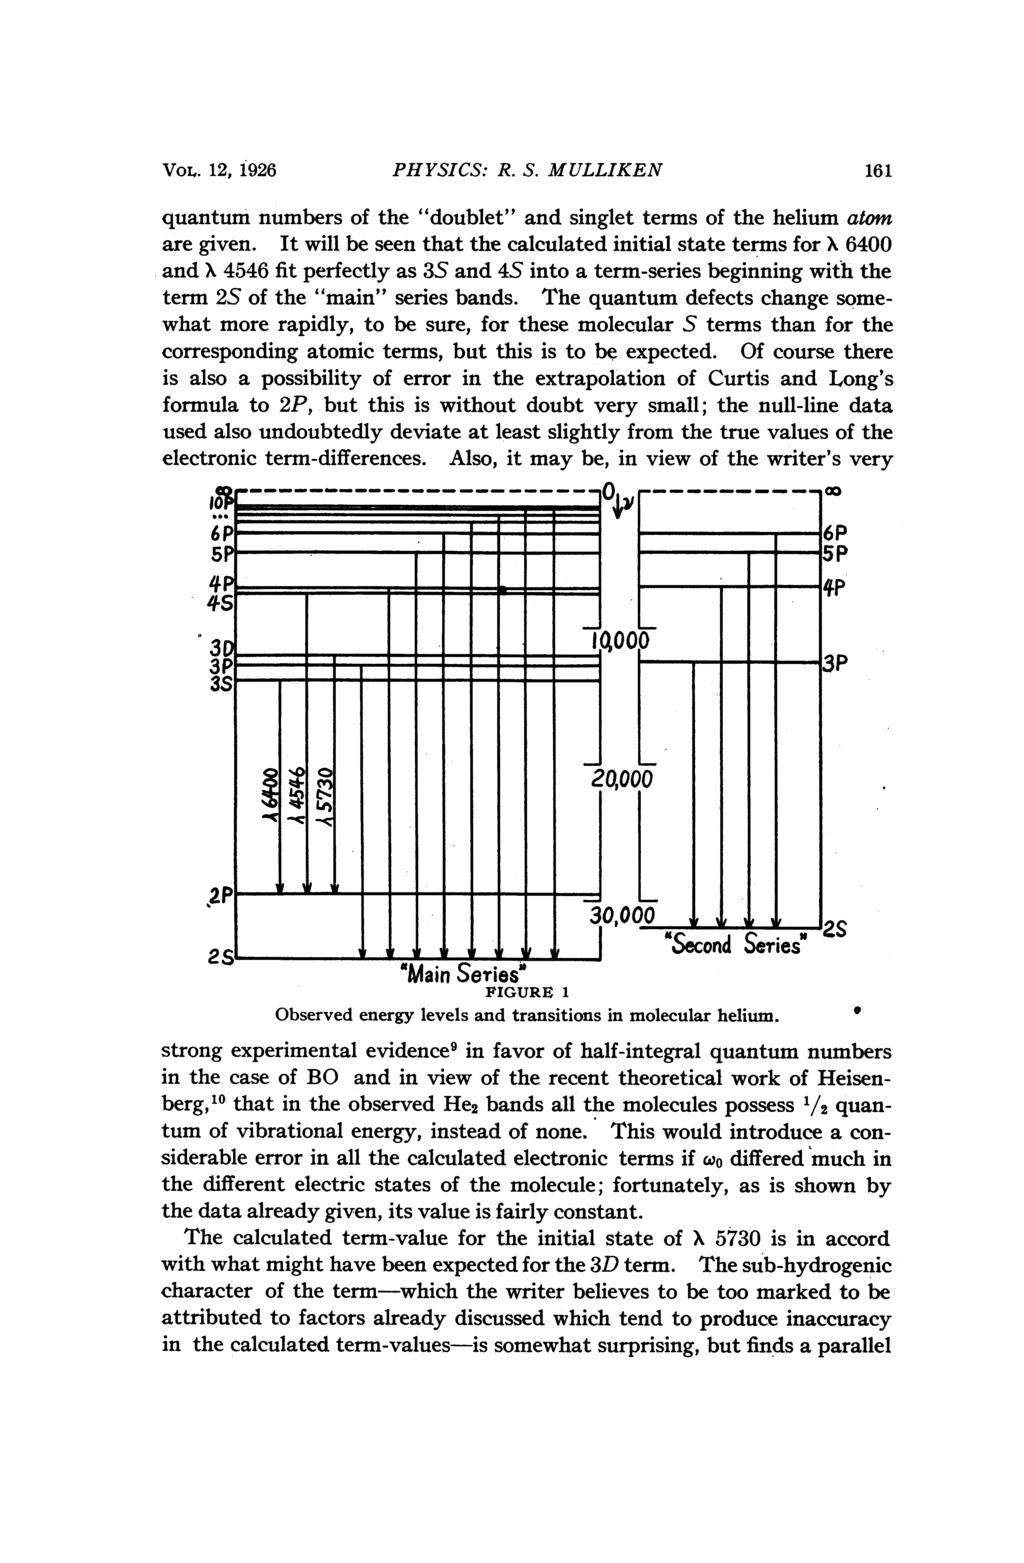 VoL. 12, 1926 PHYSICS: R. S. MULLIKEN 161 quantum numbers of the "doublet" and singlet terms of the helium atom are given.